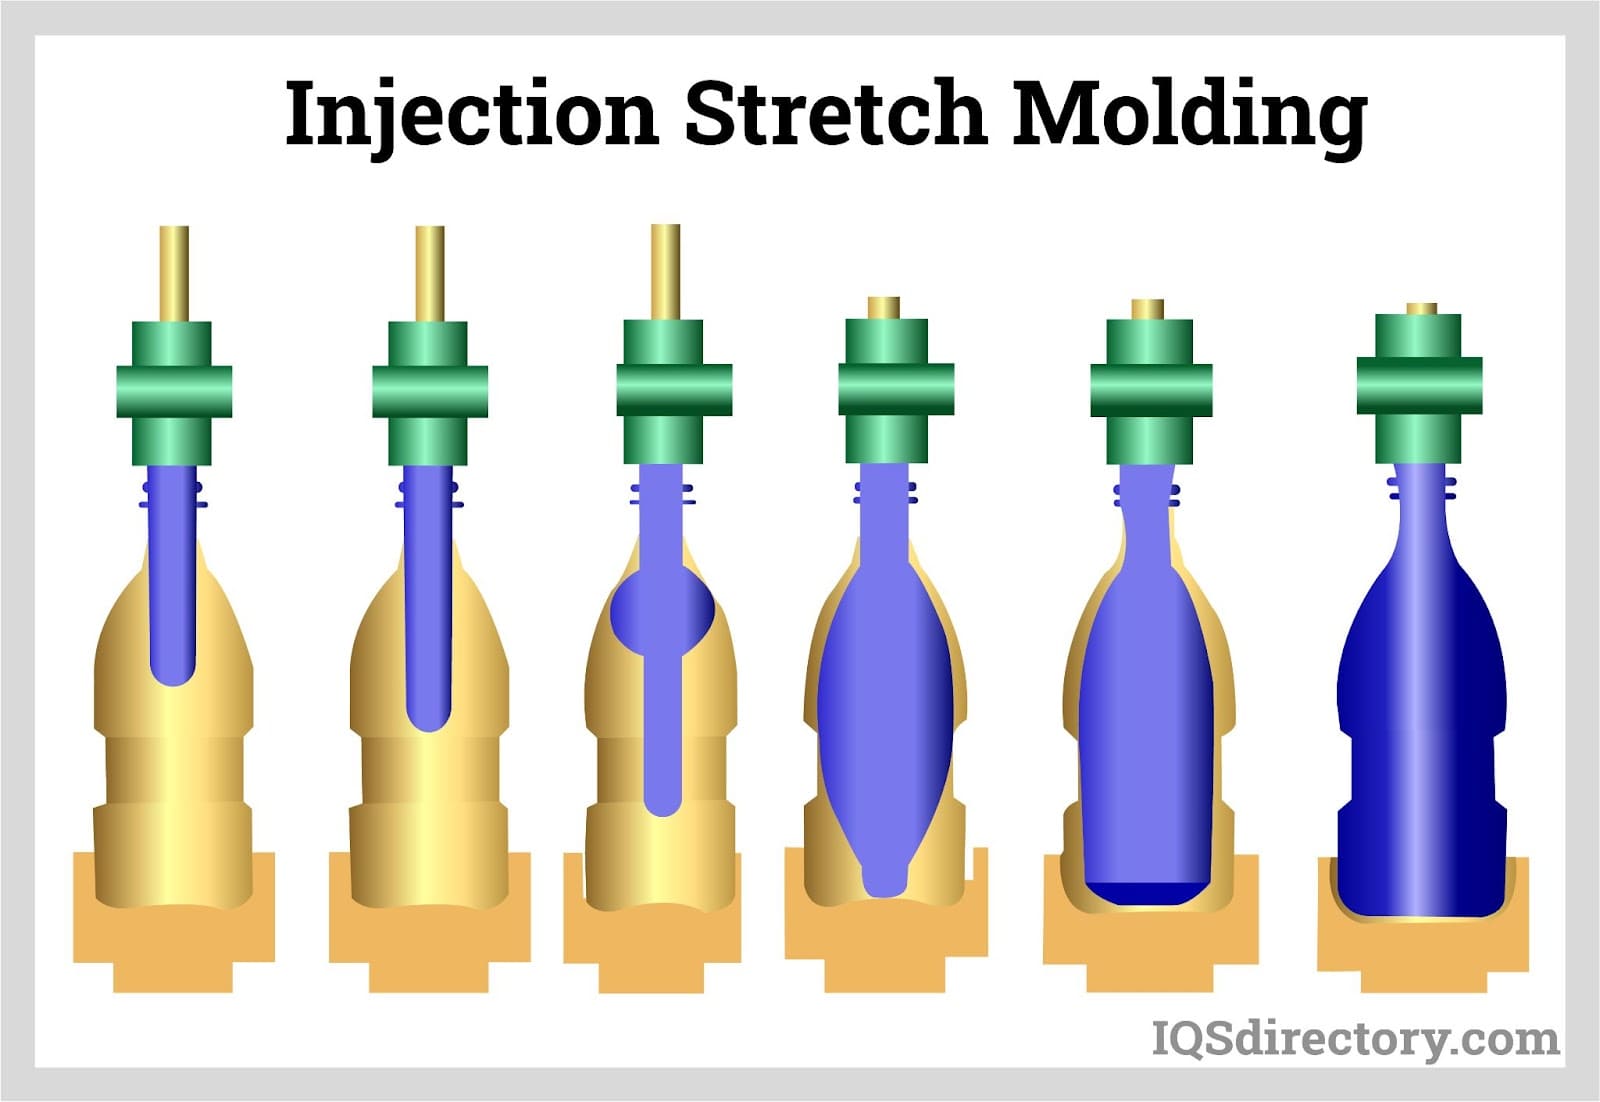 Injection Stretch Molding